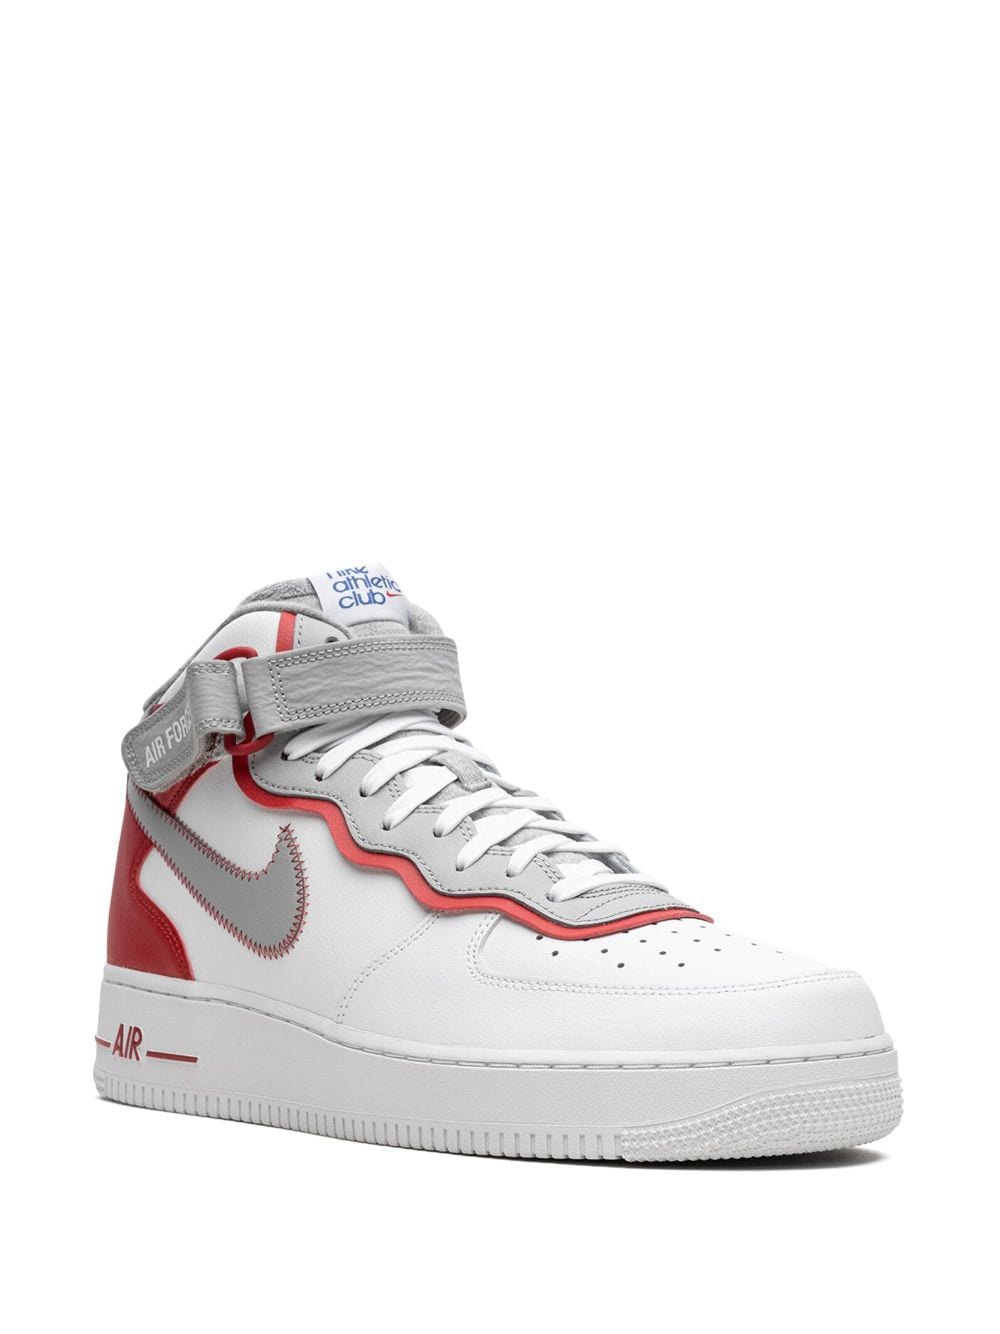 Nike Air Force 1 '07 LV8 Athletic Club Mens Shoes Size 8-12 new